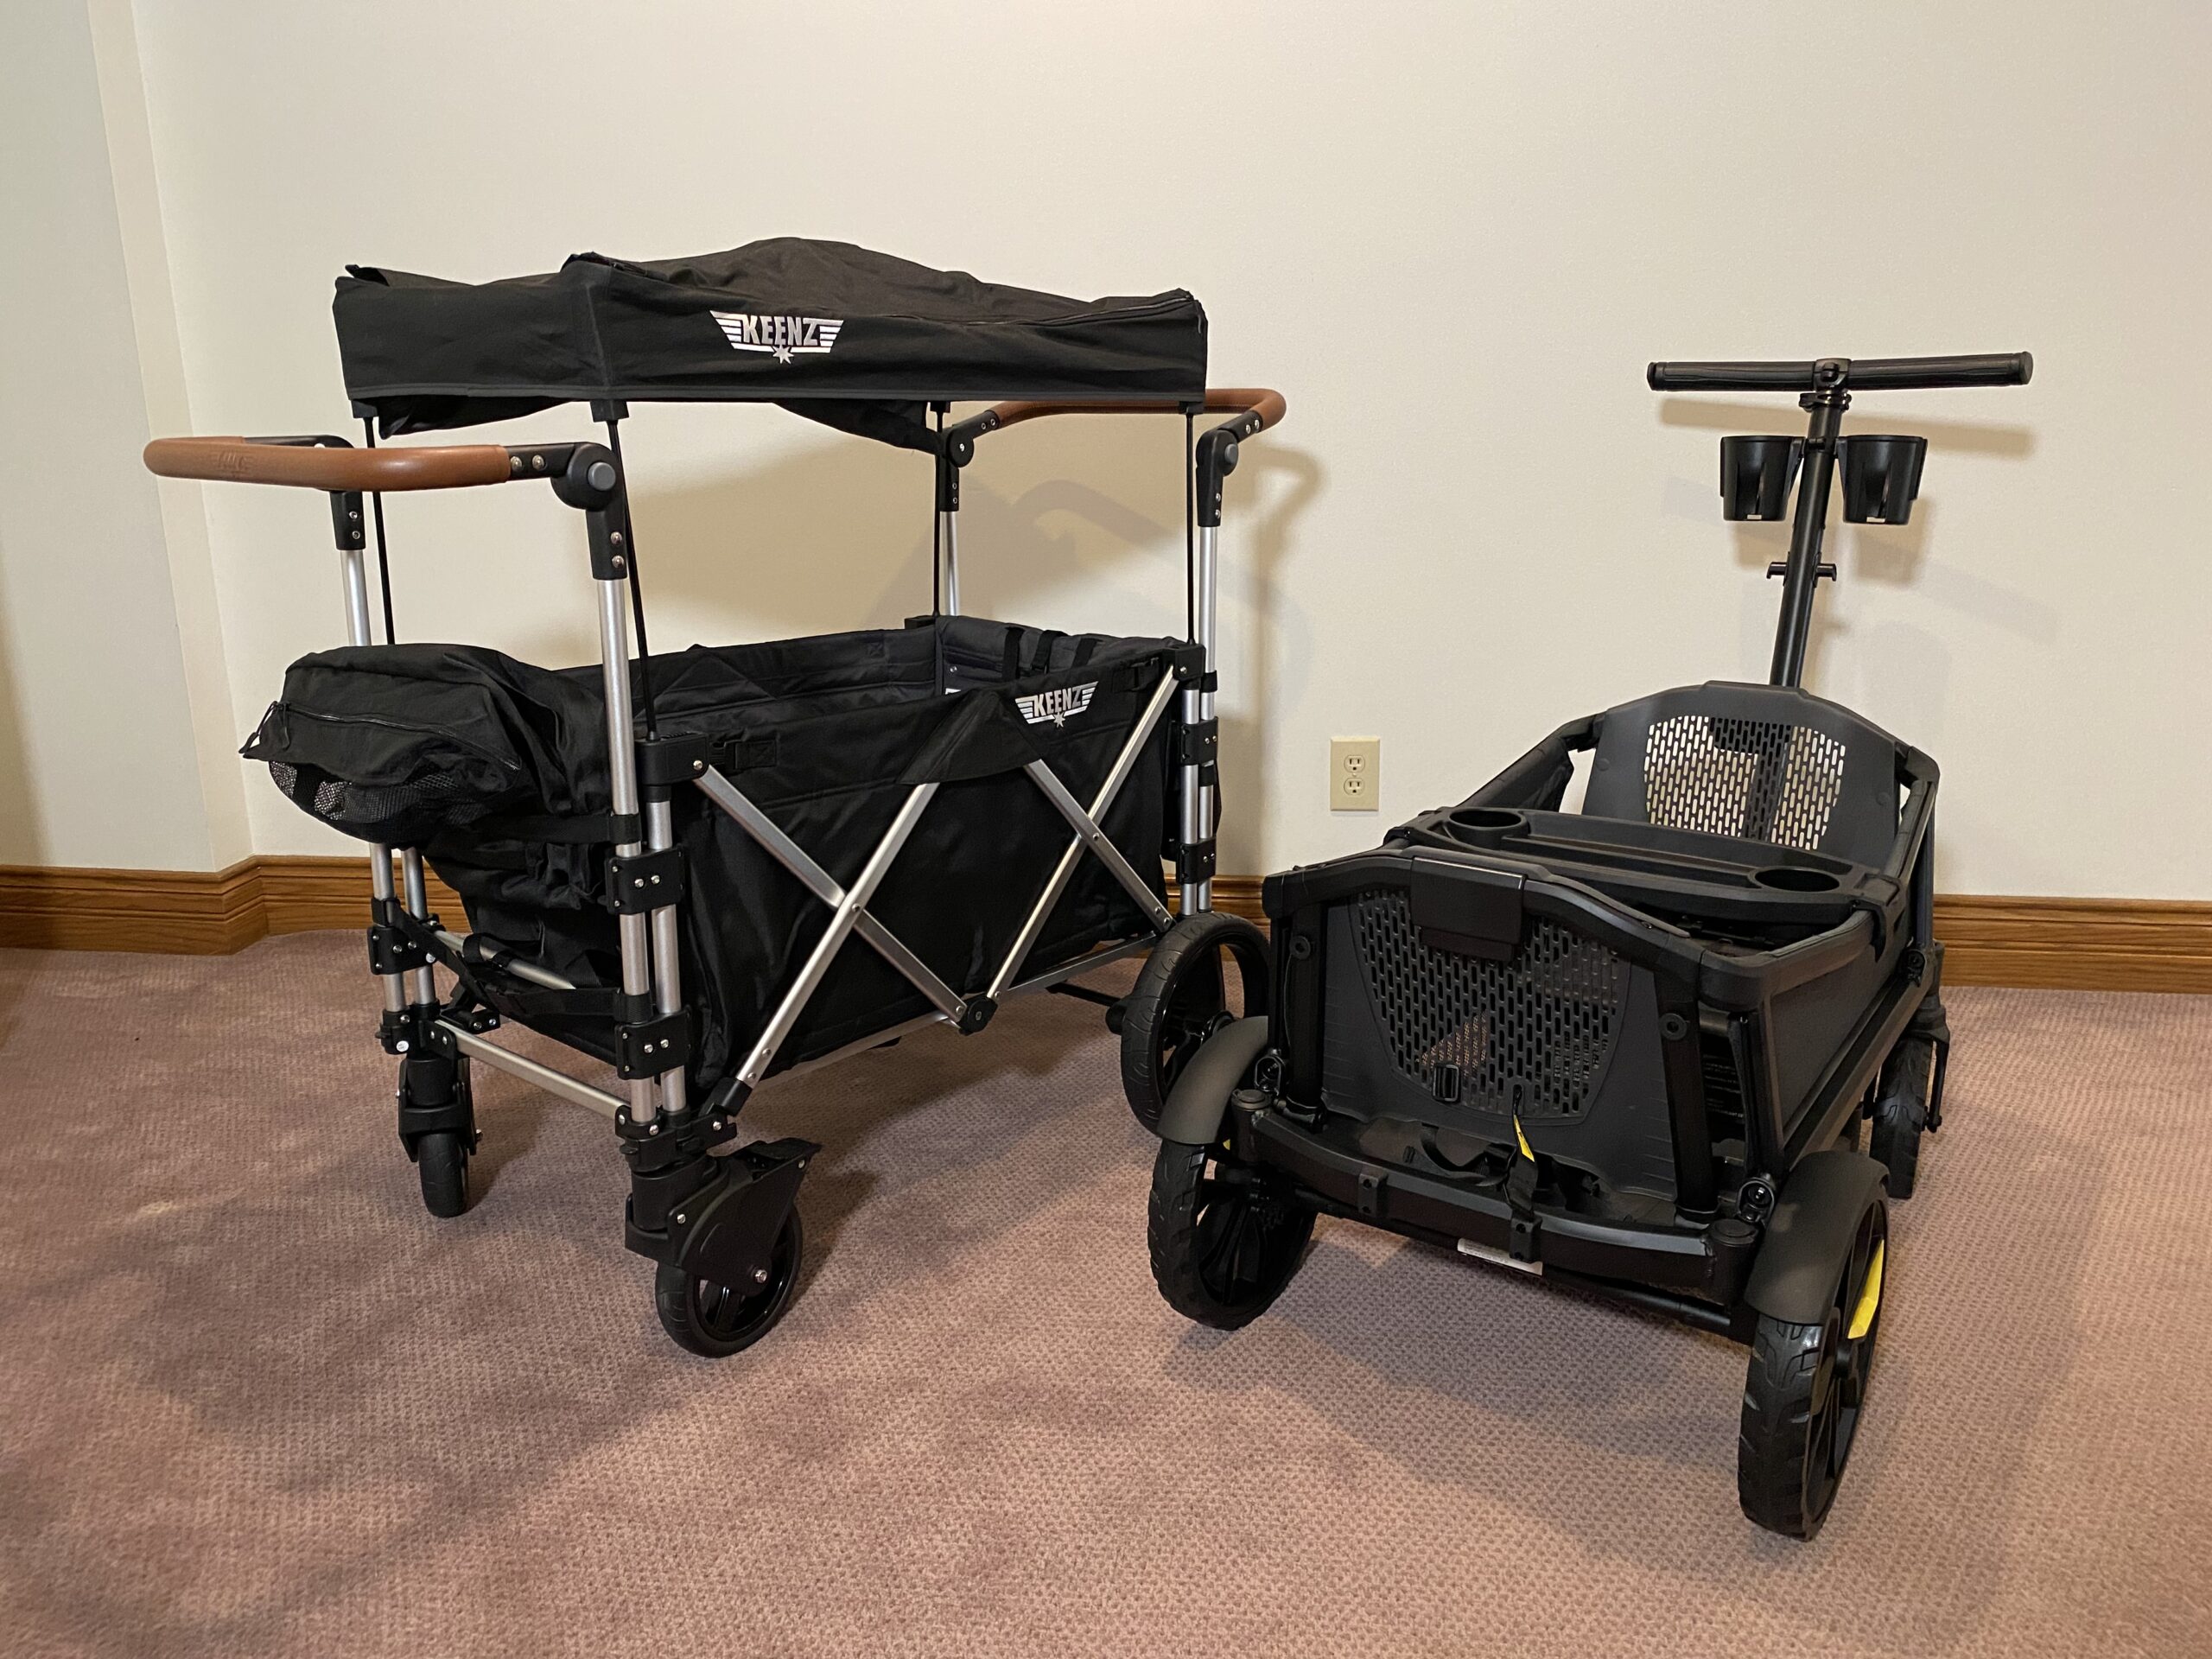 Keenz 7s stroller wagon sitting side by side with the veer cruiser